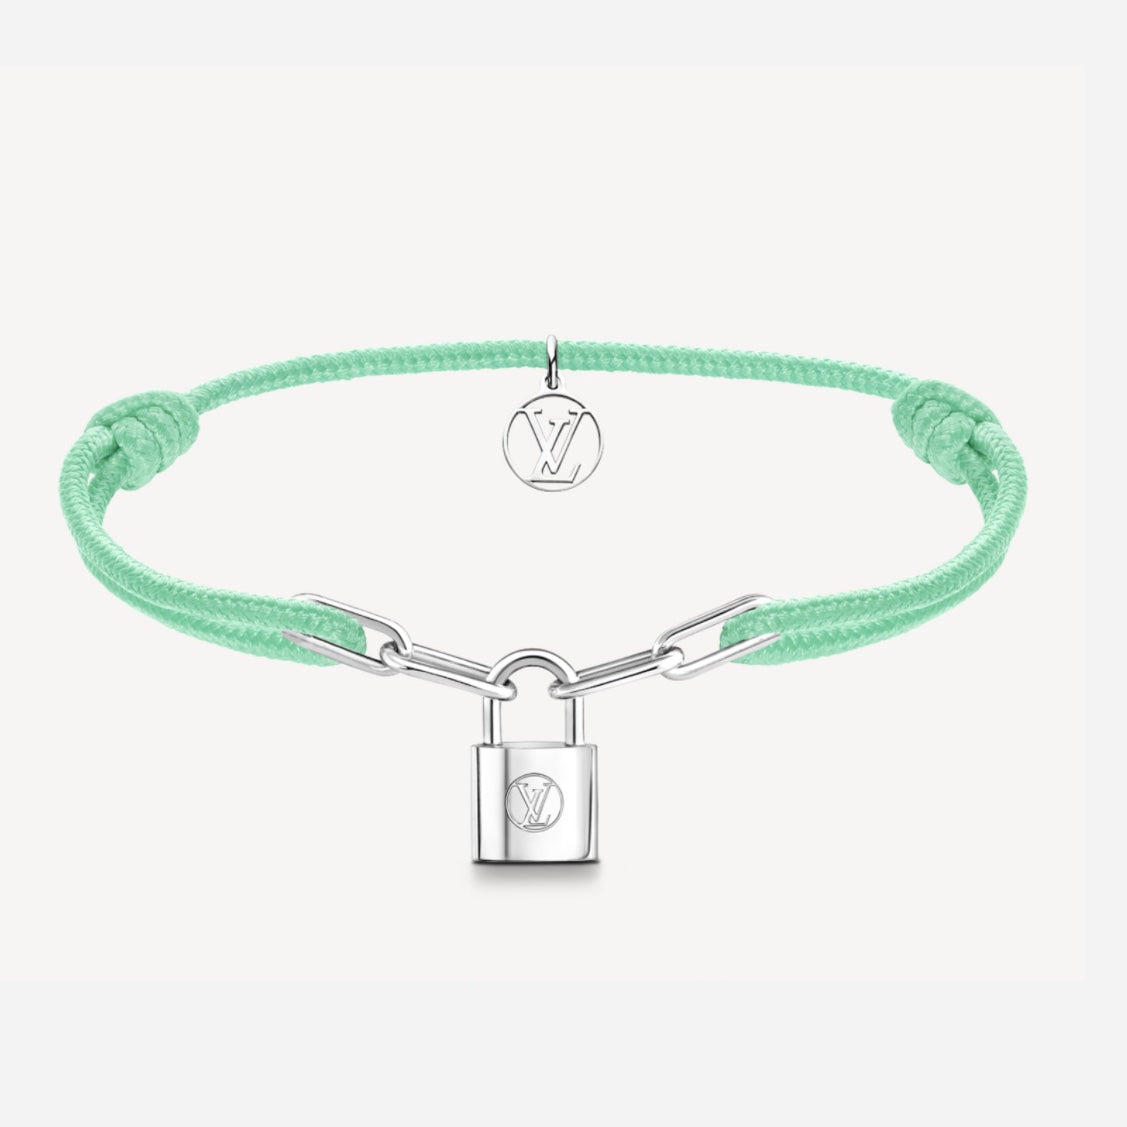 Louis Vuitton renews commitment to UNICEF with new Silver Lockit bracelets  designed by Virgil Abloh - LVMH